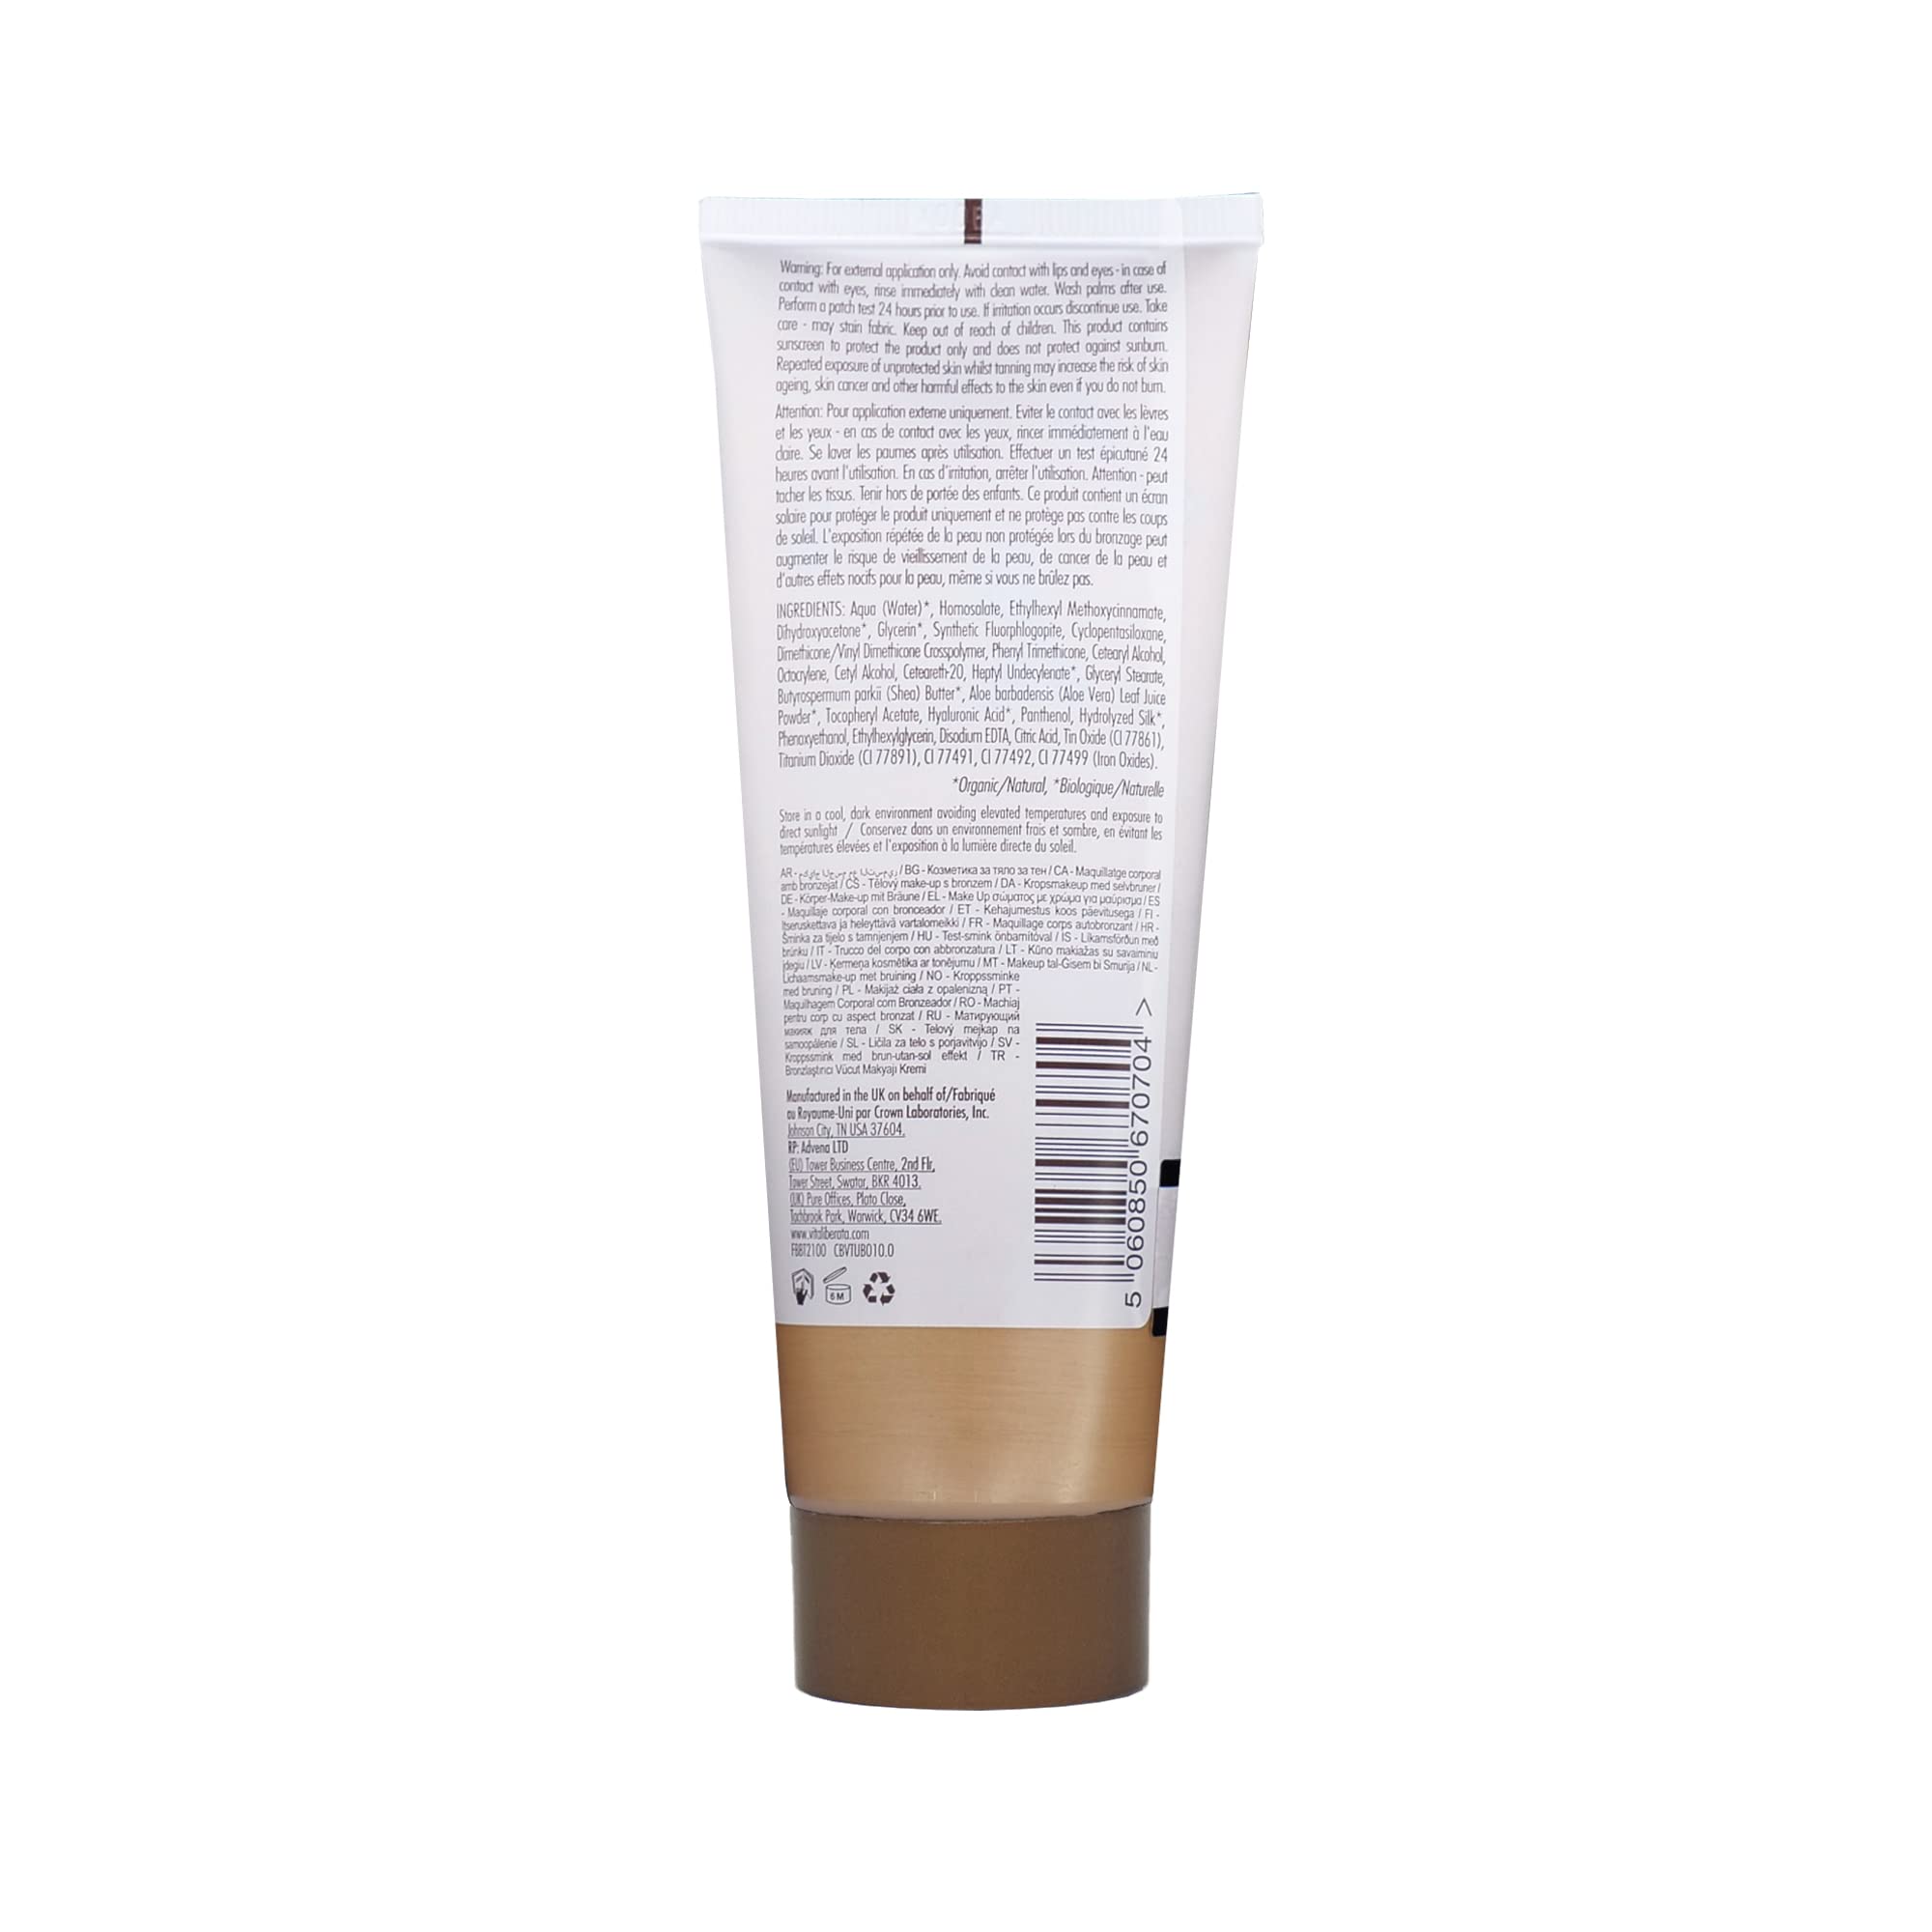 Vita Liberata Body Blur With Tan, Leg and Body Makeup. Skin Perfecting Body Foundation for Flawless Bronze, Easy Application, Radiant Glow, Evens Skin Tone, 3.38 Fl.Oz, NEW PACKAGING